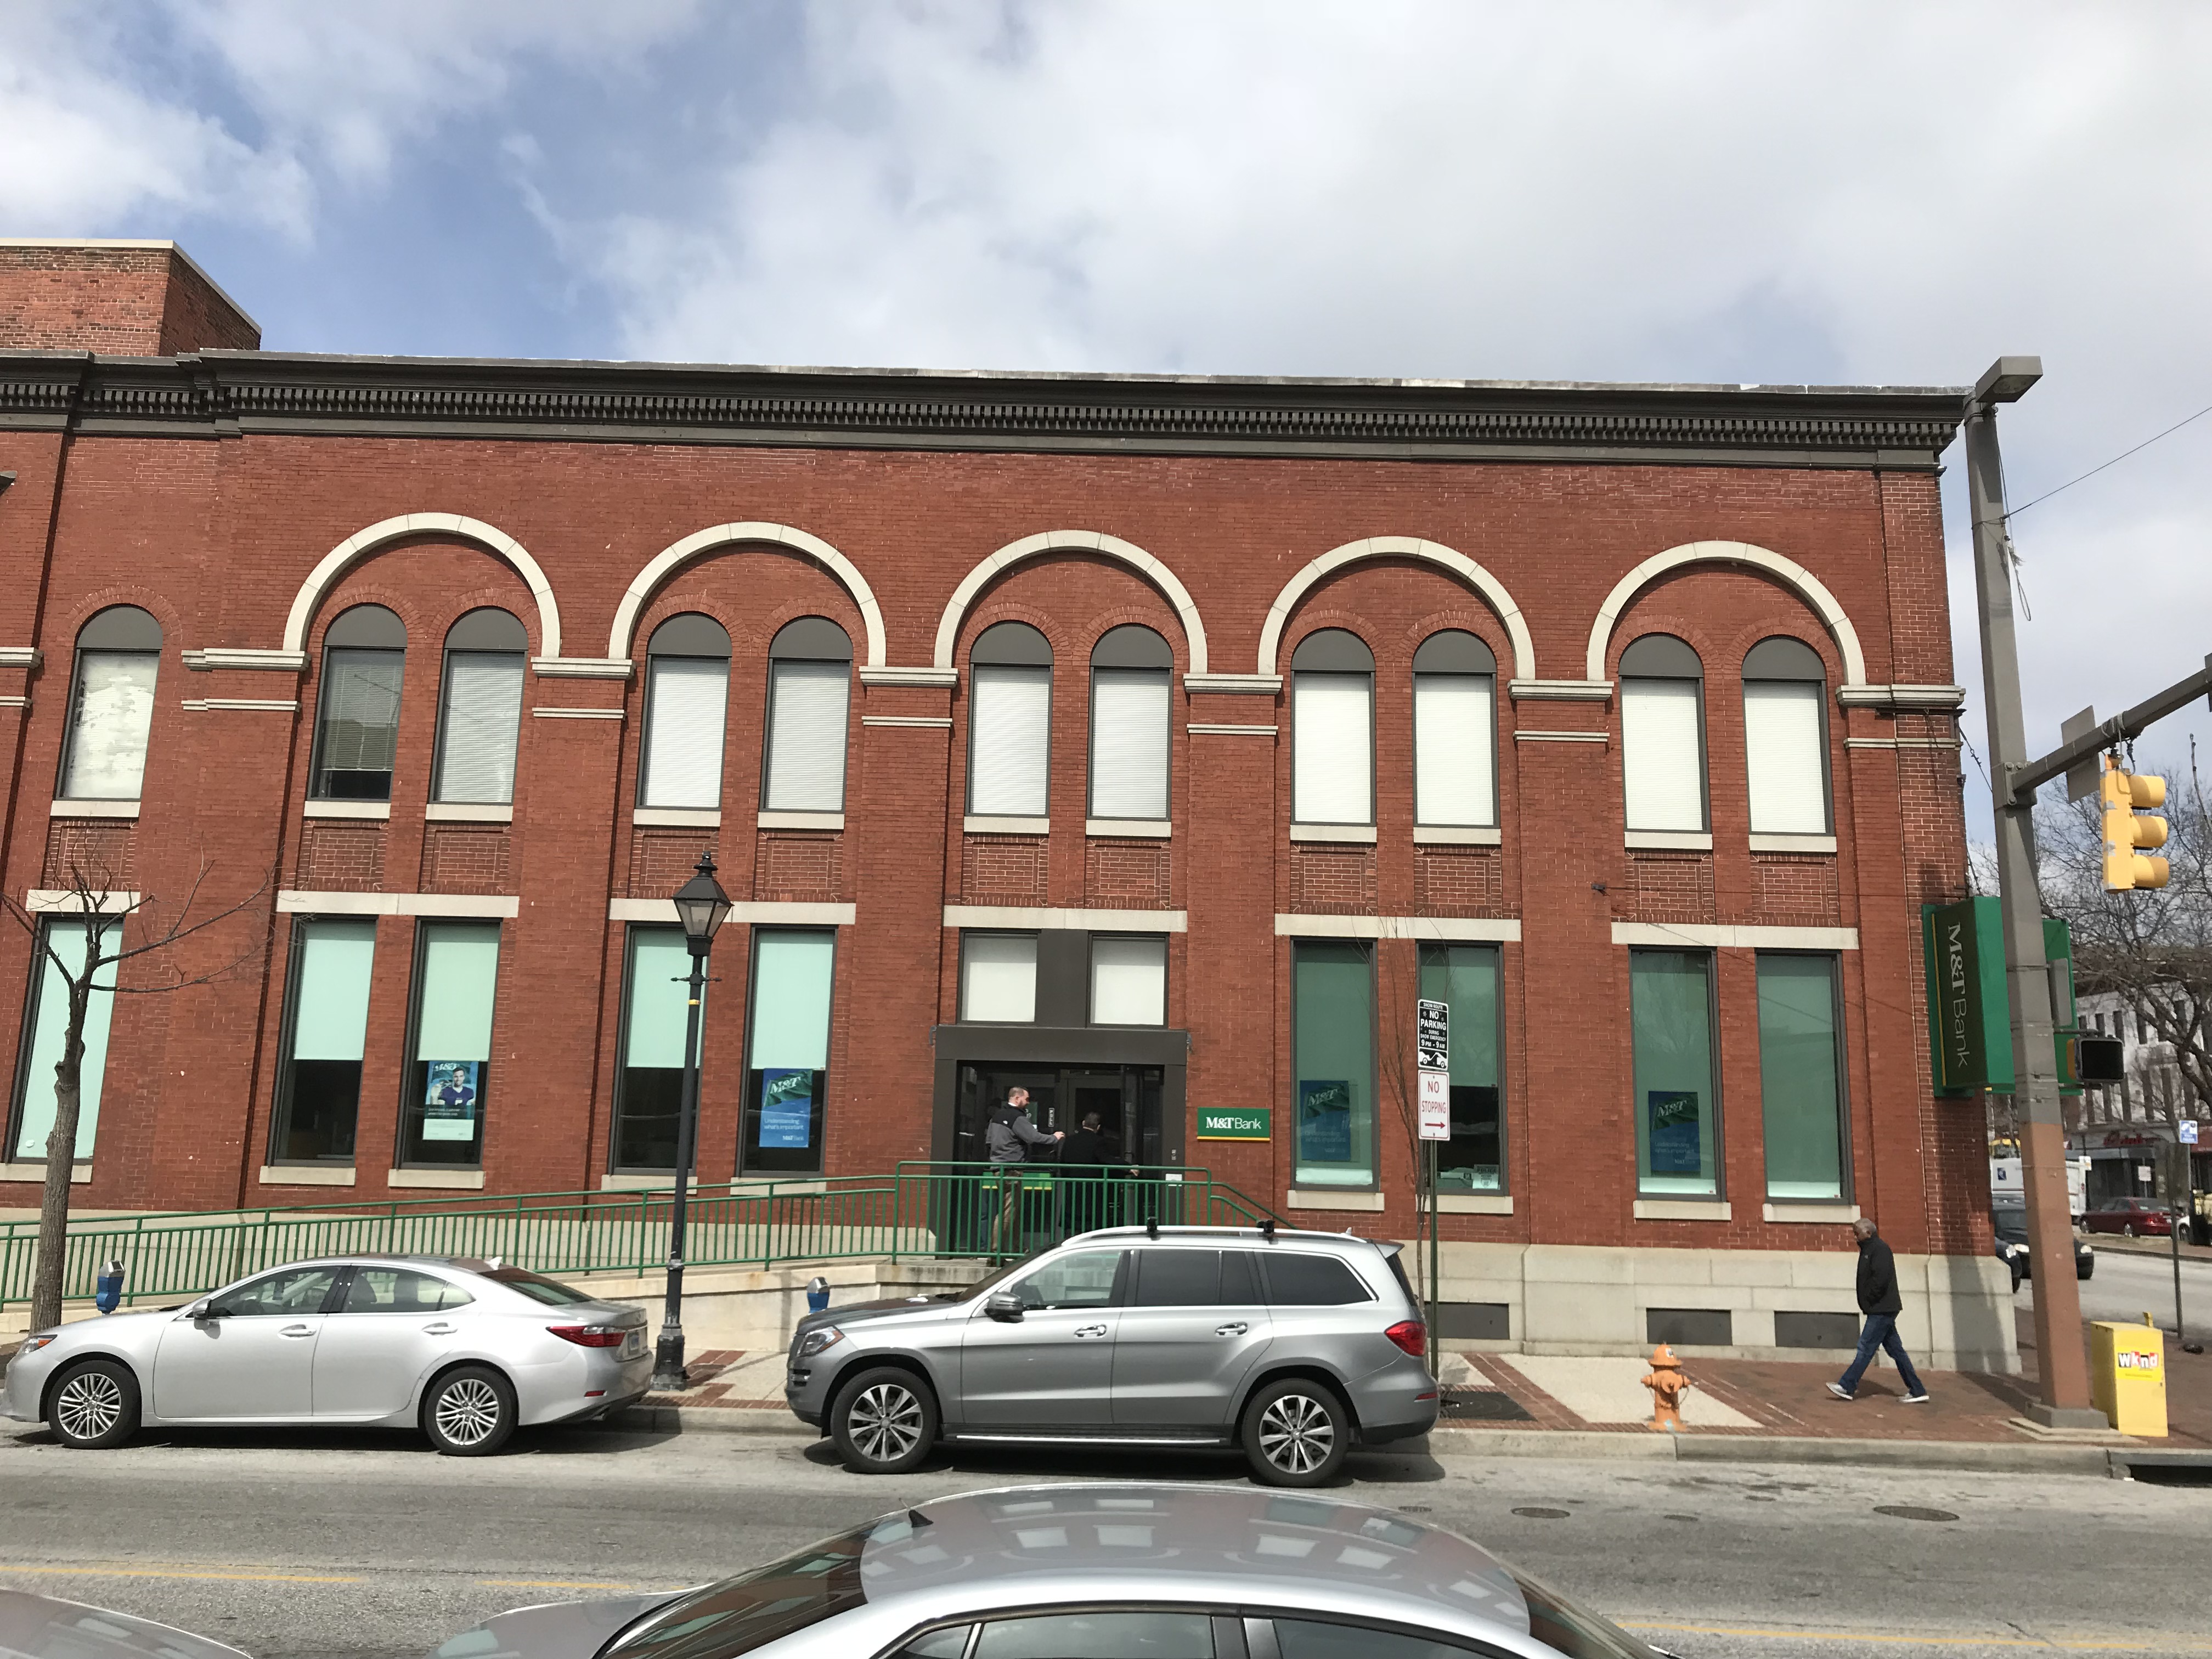 M&T Bank Fells Point Branch, 432 S. Broadway, Baltimore, MD 21231, Baltimore, Broadway, Building, Car, HQ Photo